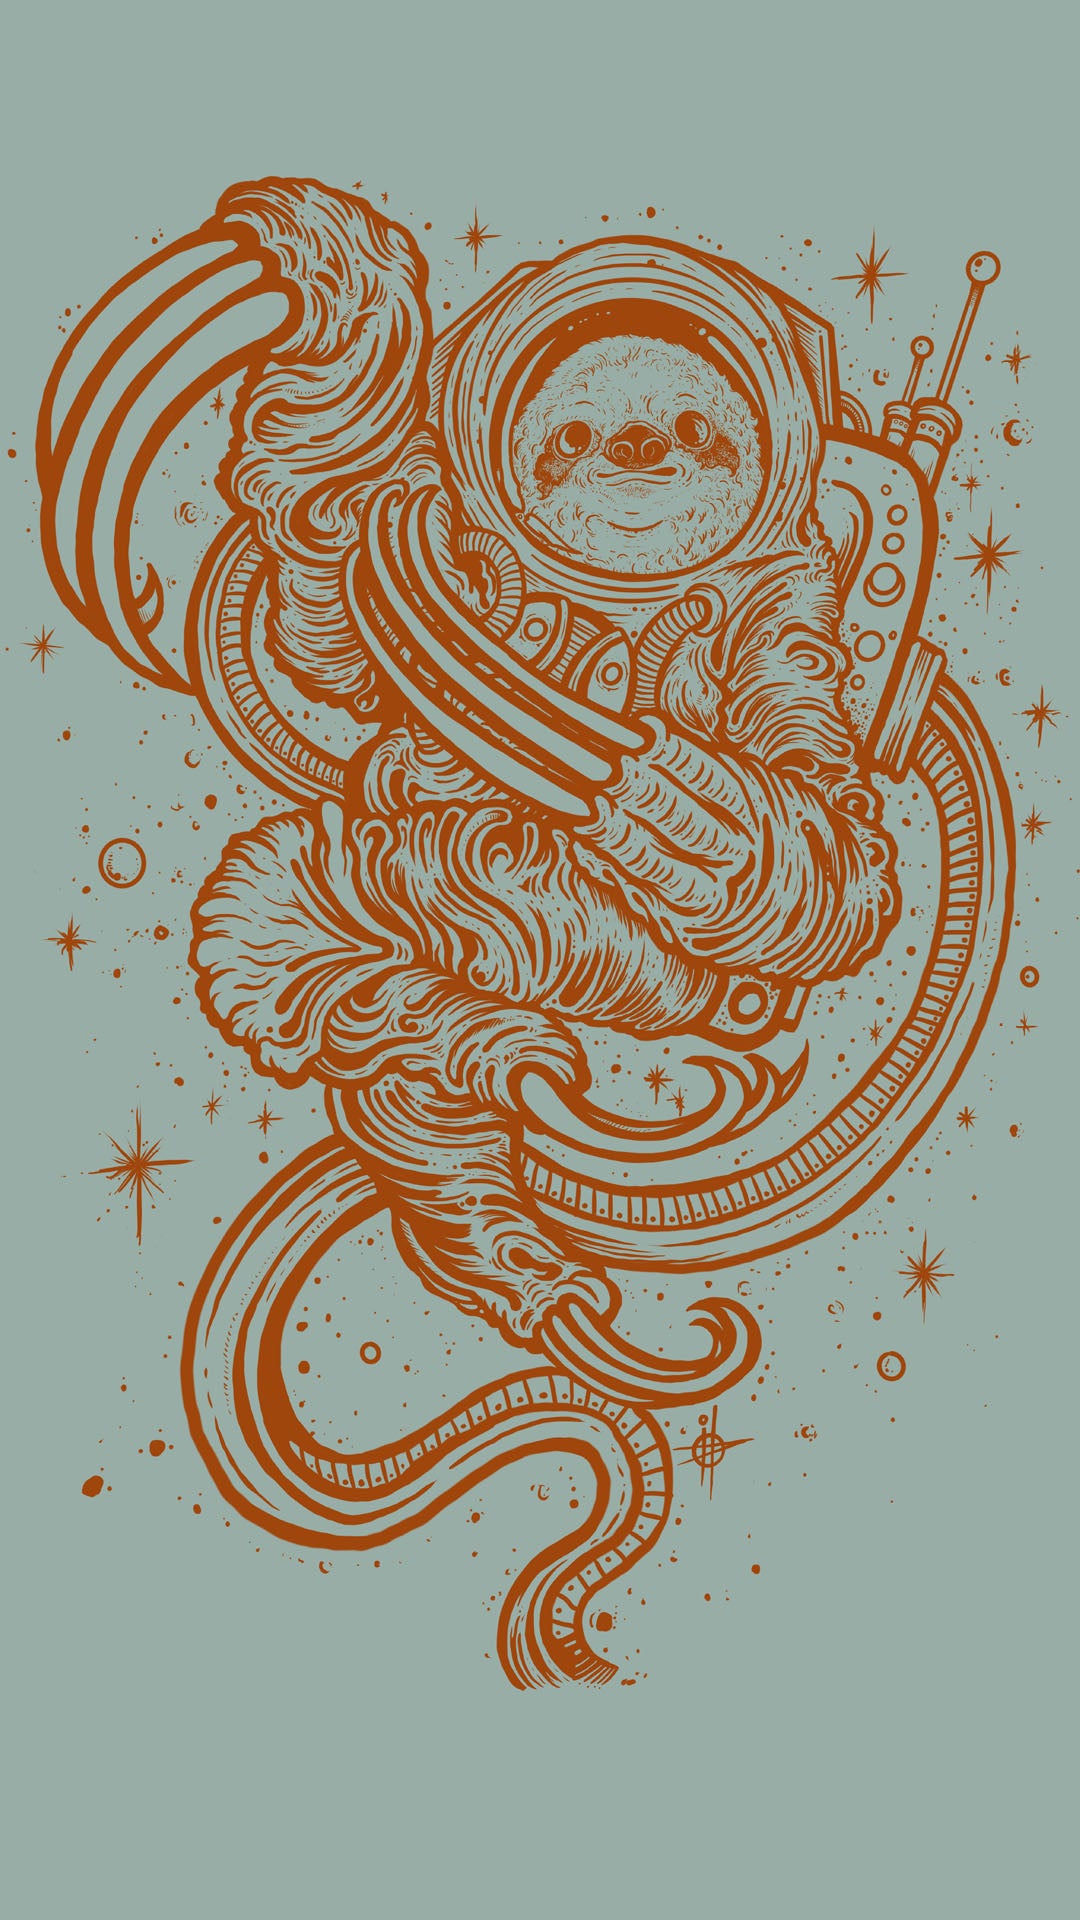 SPACE SLOTH